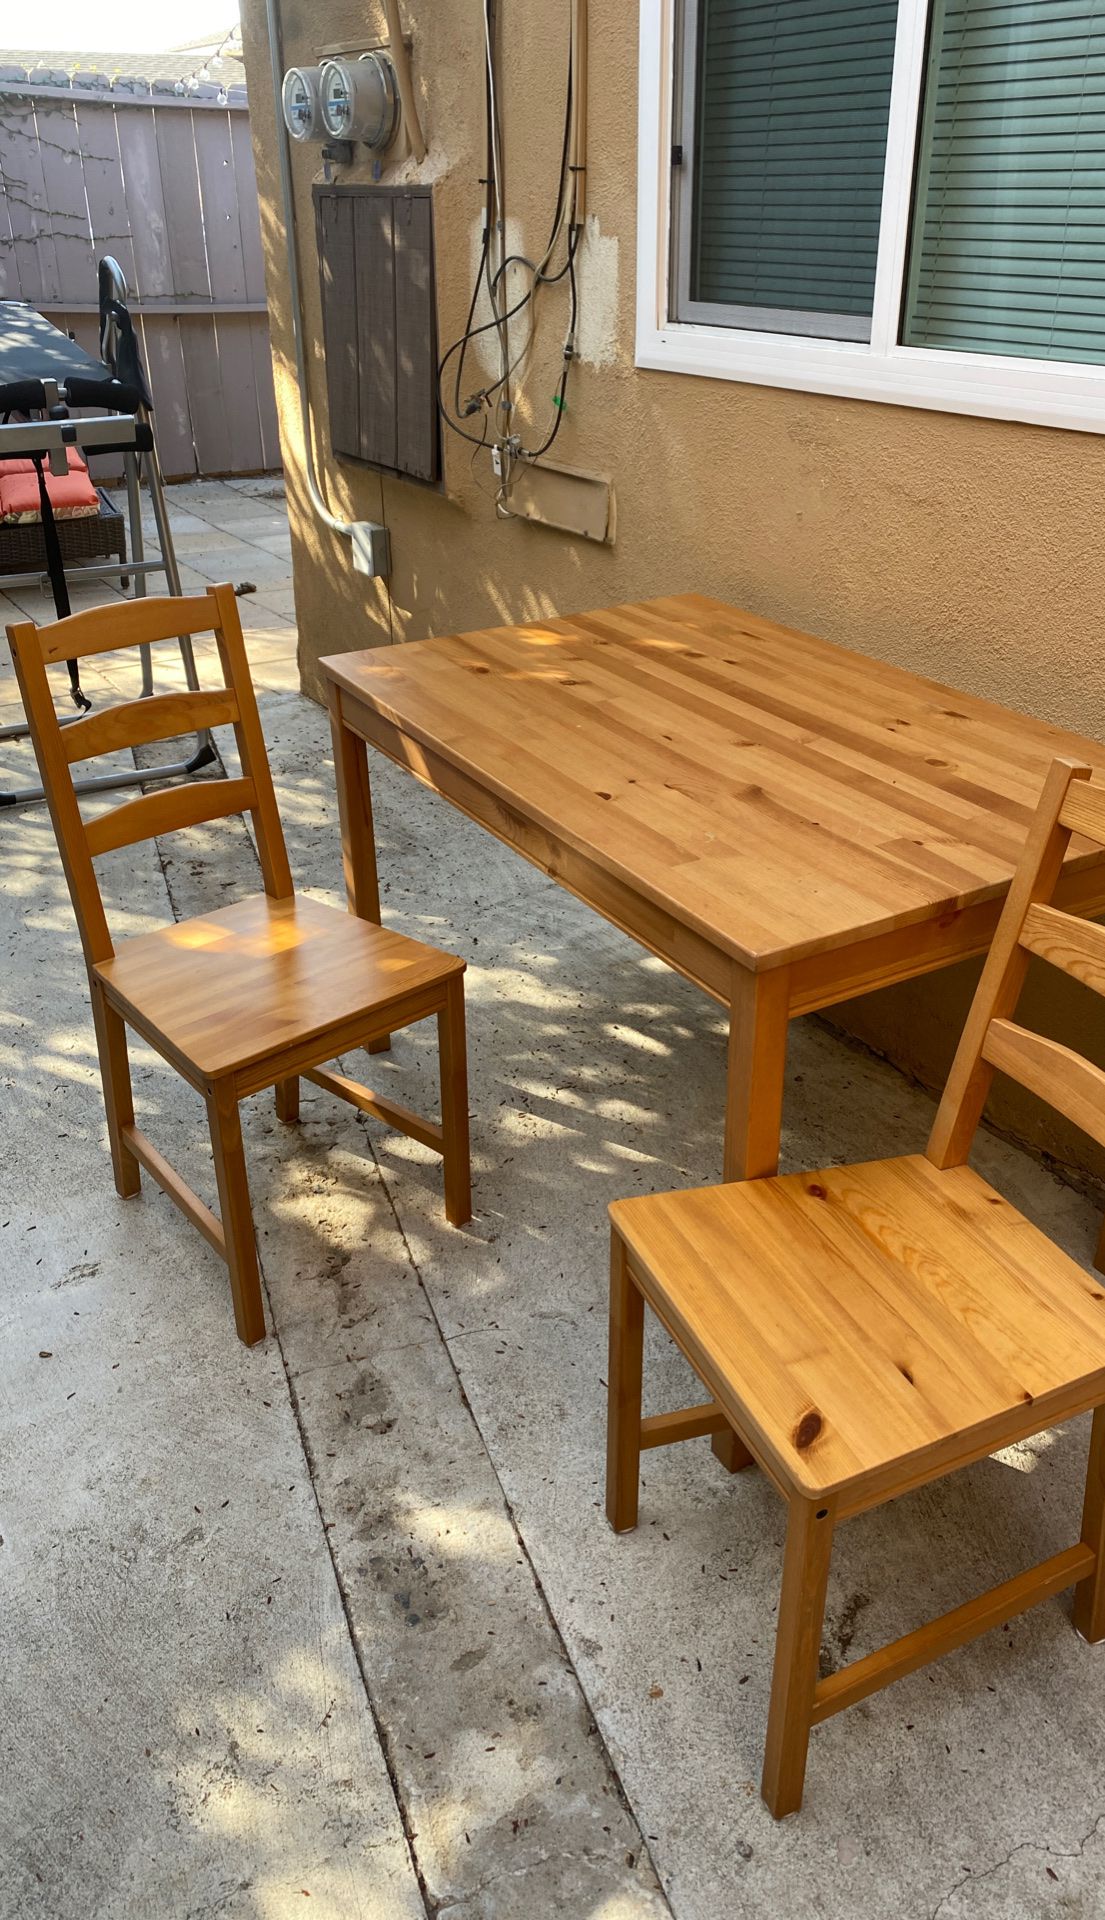 Wooden dining table & 4 chairs (ikea)